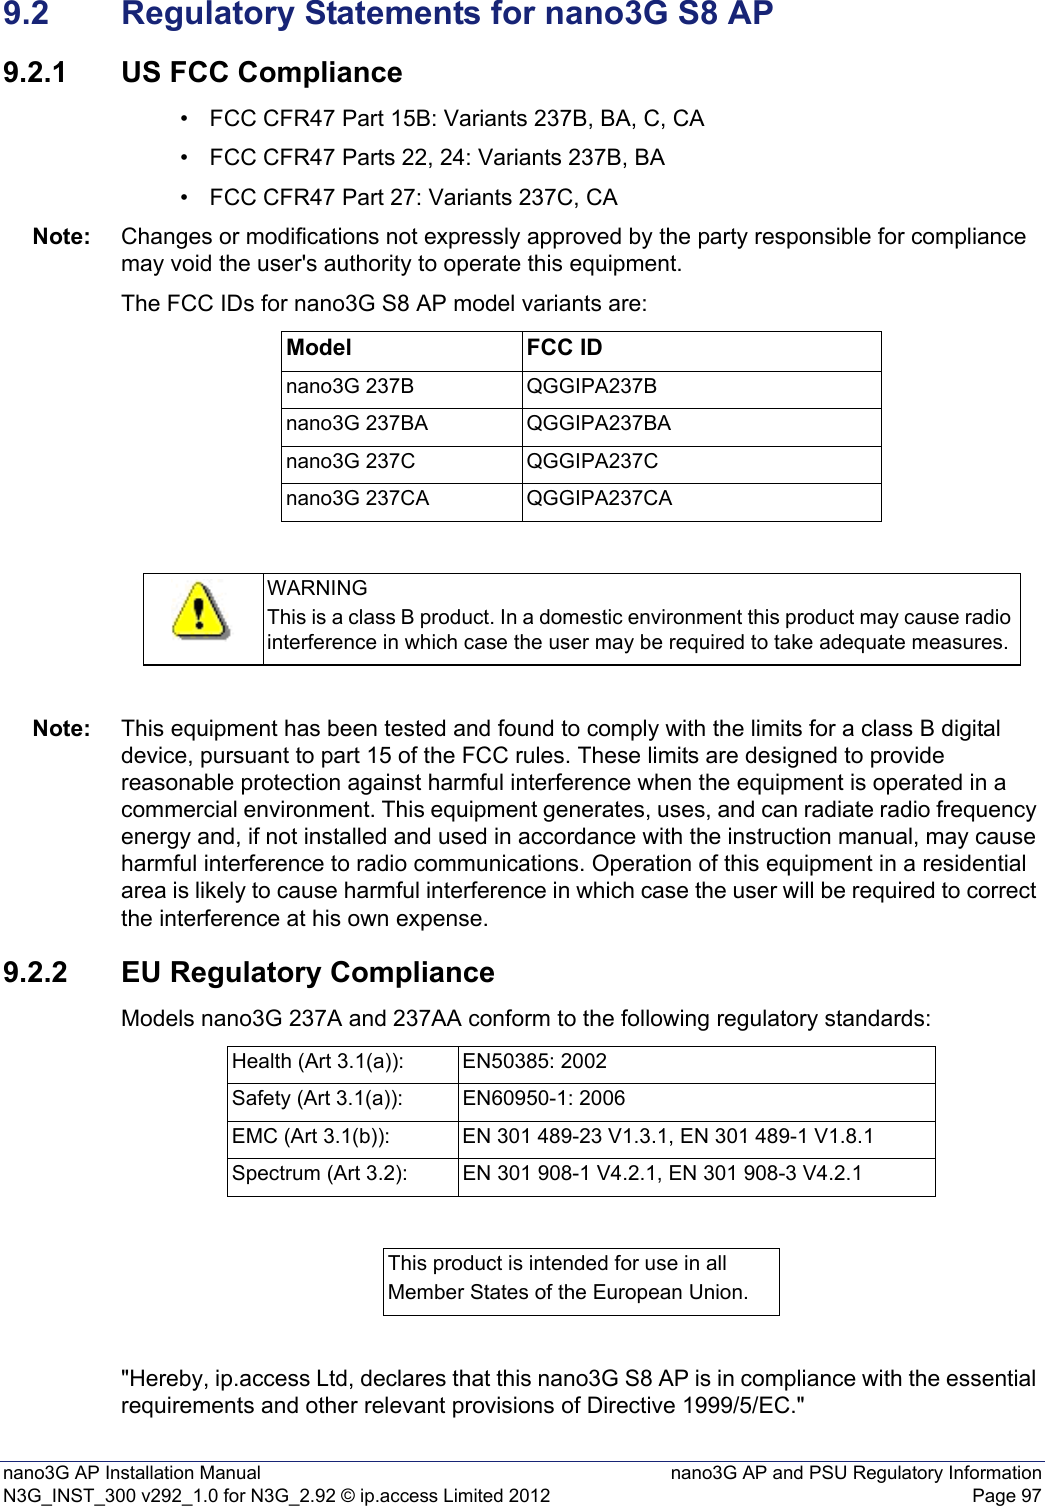 nano3G AP Installation Manual nano3G AP and PSU Regulatory InformationN3G_INST_300 v292_1.0 for N3G_2.92 © ip.access Limited 2012 Page 979.2 Regulatory Statements for nano3G S8 AP9.2.1 US FCC Compliance• FCC CFR47 Part 15B: Variants 237B, BA, C, CA• FCC CFR47 Parts 22, 24: Variants 237B, BA• FCC CFR47 Part 27: Variants 237C, CANote: Changes or modifications not expressly approved by the party responsible for compliance may void the user&apos;s authority to operate this equipment.The FCC IDs for nano3G S8 AP model variants are:Note: This equipment has been tested and found to comply with the limits for a class B digital device, pursuant to part 15 of the FCC rules. These limits are designed to provide reasonable protection against harmful interference when the equipment is operated in a commercial environment. This equipment generates, uses, and can radiate radio frequency energy and, if not installed and used in accordance with the instruction manual, may cause harmful interference to radio communications. Operation of this equipment in a residential area is likely to cause harmful interference in which case the user will be required to correct the interference at his own expense.9.2.2 EU Regulatory ComplianceModels nano3G 237A and 237AA conform to the following regulatory standards:&quot;Hereby, ip.access Ltd, declares that this nano3G S8 AP is in compliance with the essential requirements and other relevant provisions of Directive 1999/5/EC.&quot;Model FCC IDnano3G 237B QGGIPA237Bnano3G 237BA QGGIPA237BAnano3G 237C QGGIPA237Cnano3G 237CA QGGIPA237CAWARNINGThis is a class B product. In a domestic environment this product may cause radio interference in which case the user may be required to take adequate measures.Health (Art 3.1(a)): EN50385: 2002Safety (Art 3.1(a)): EN60950-1: 2006EMC (Art 3.1(b)): EN 301 489-23 V1.3.1, EN 301 489-1 V1.8.1Spectrum (Art 3.2): EN 301 908-1 V4.2.1, EN 301 908-3 V4.2.1This product is intended for use in allMember States of the European Union.